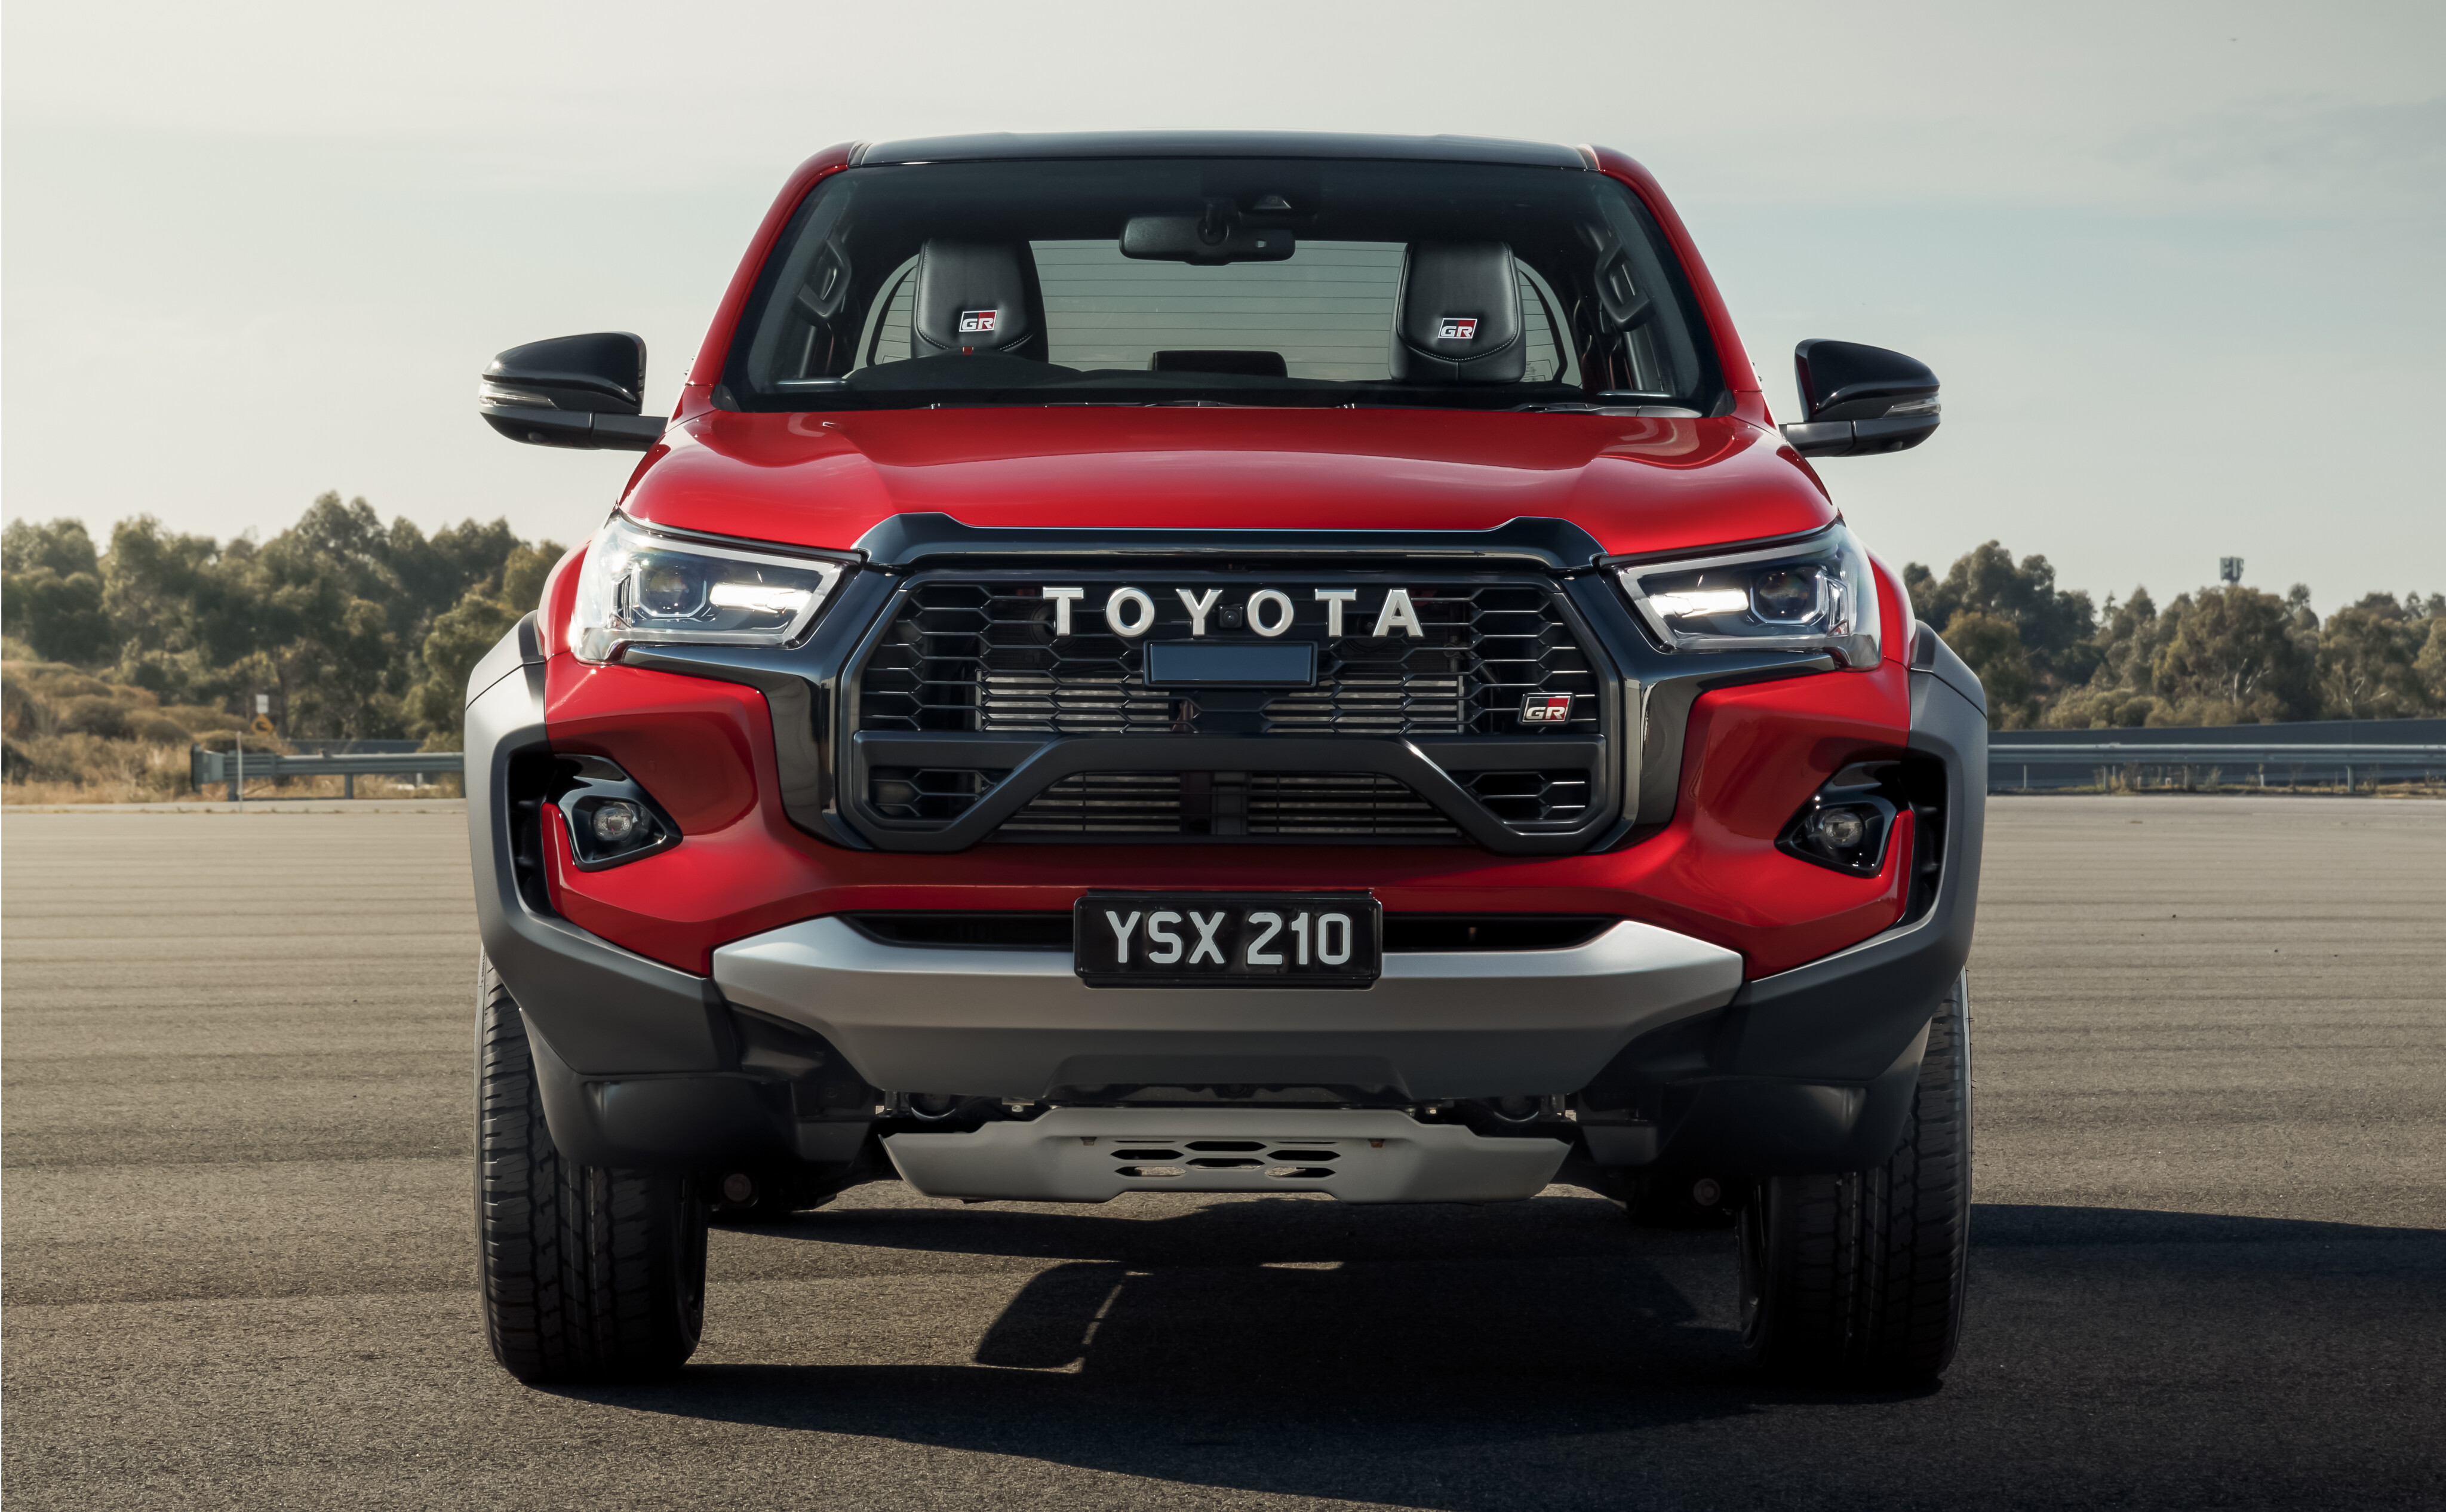 2024 Toyota HiLux: “Surprise” reveal teased, is it an all-new model?